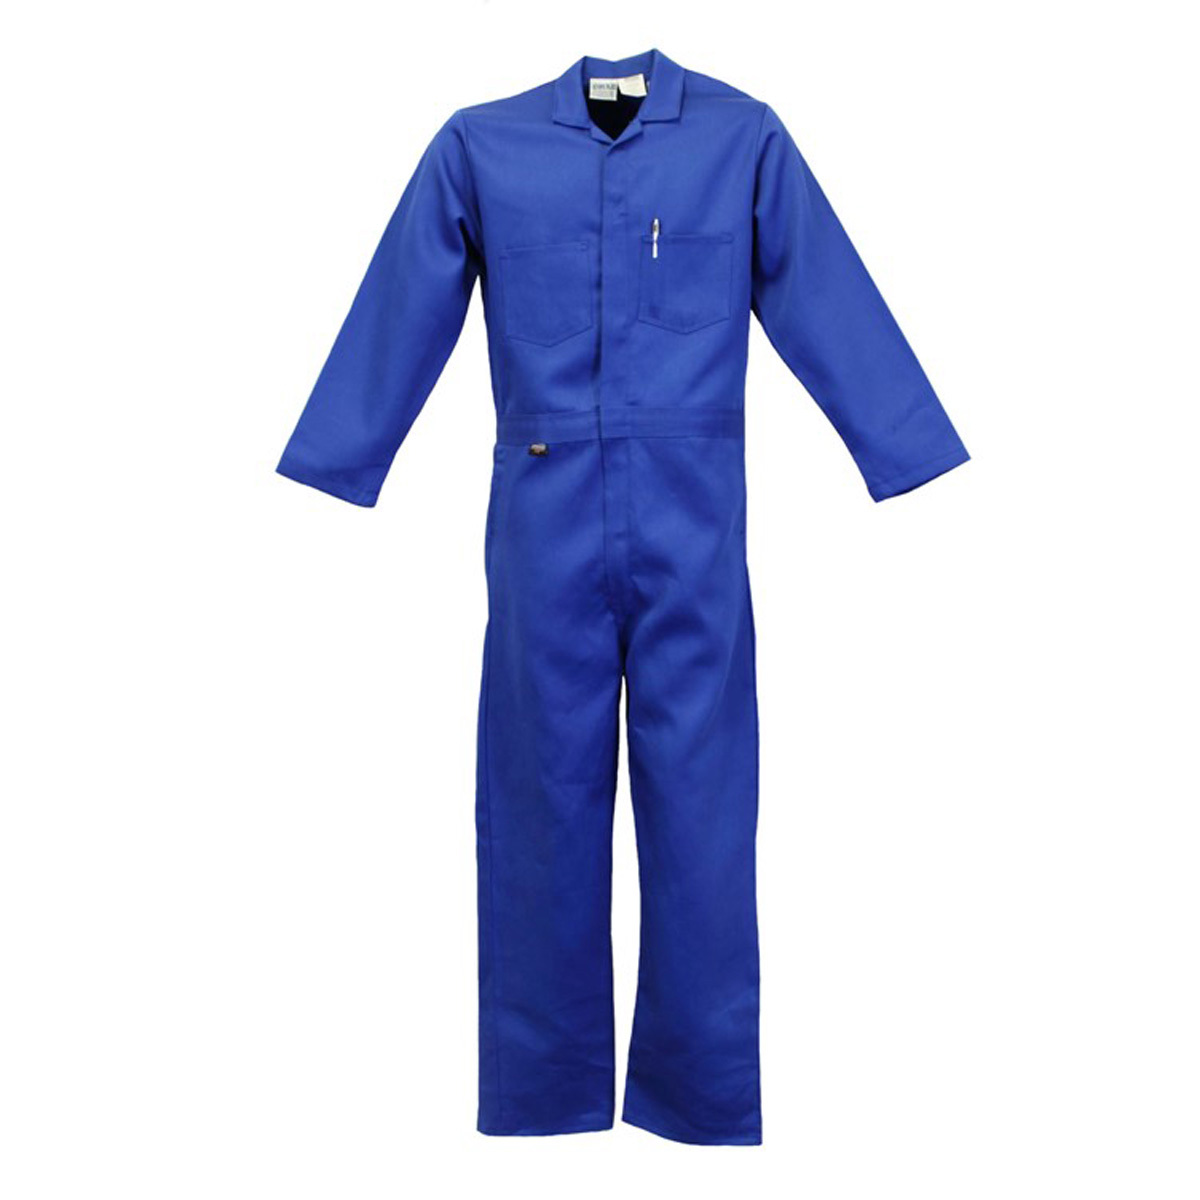 Stanco Safety Products™ Size 3X Royal Blue Indura® Arc Rated Flame Resistant Coveralls With Front Zipper Closure